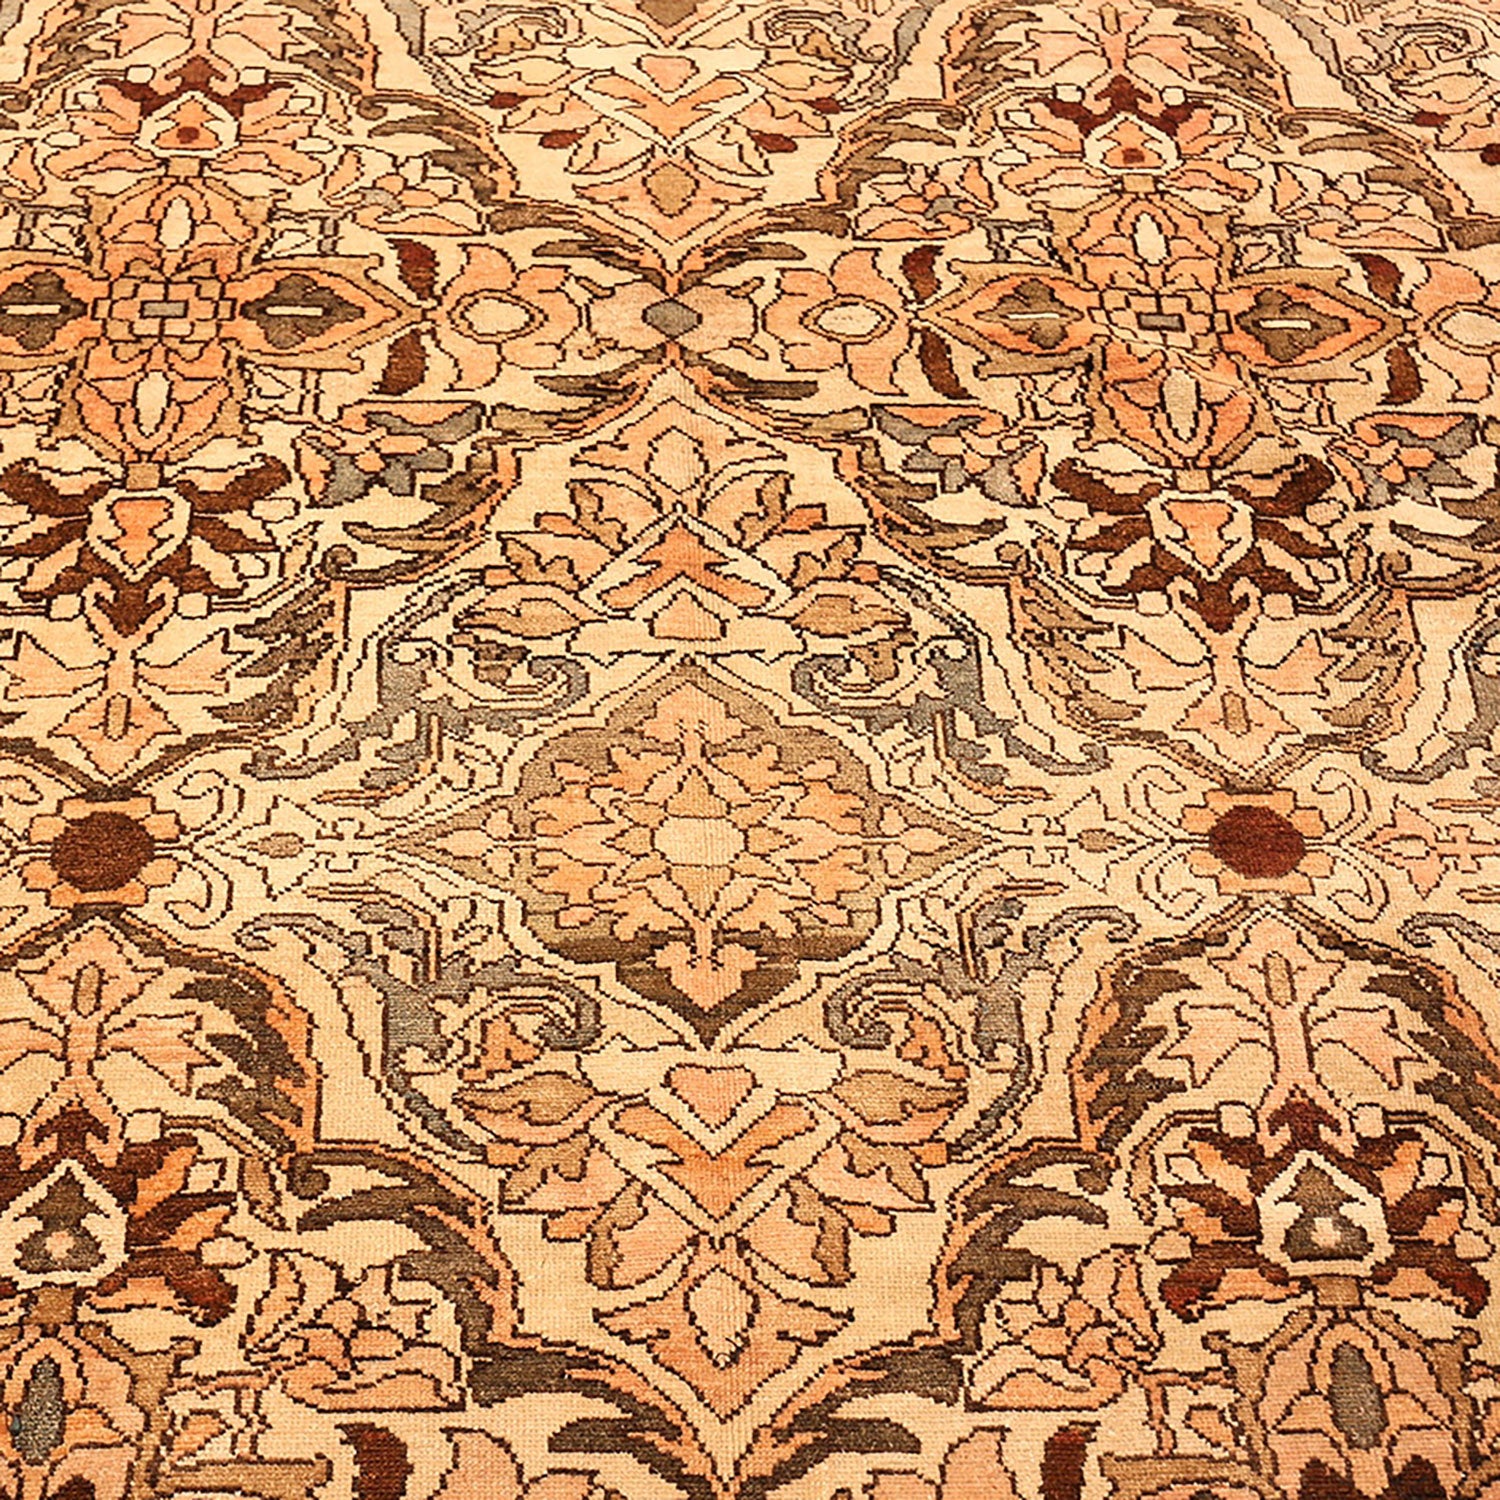 Exquisite carpet showcases a symmetrical blend of floral and geometric patterns